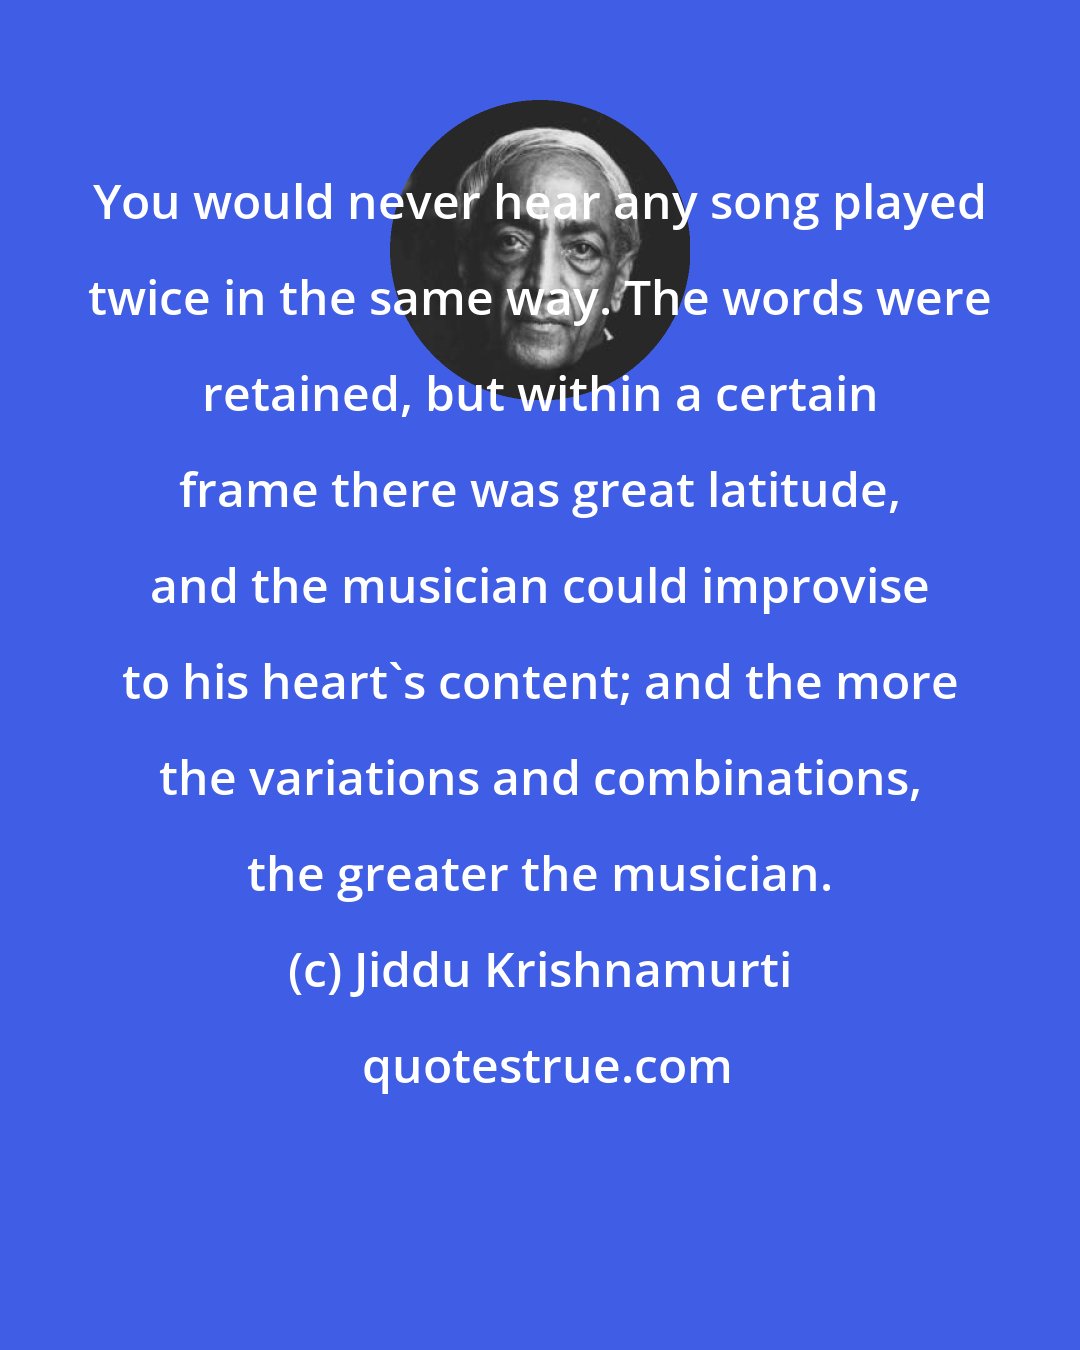 Jiddu Krishnamurti: You would never hear any song played twice in the same way. The words were retained, but within a certain frame there was great latitude, and the musician could improvise to his heart's content; and the more the variations and combinations, the greater the musician.